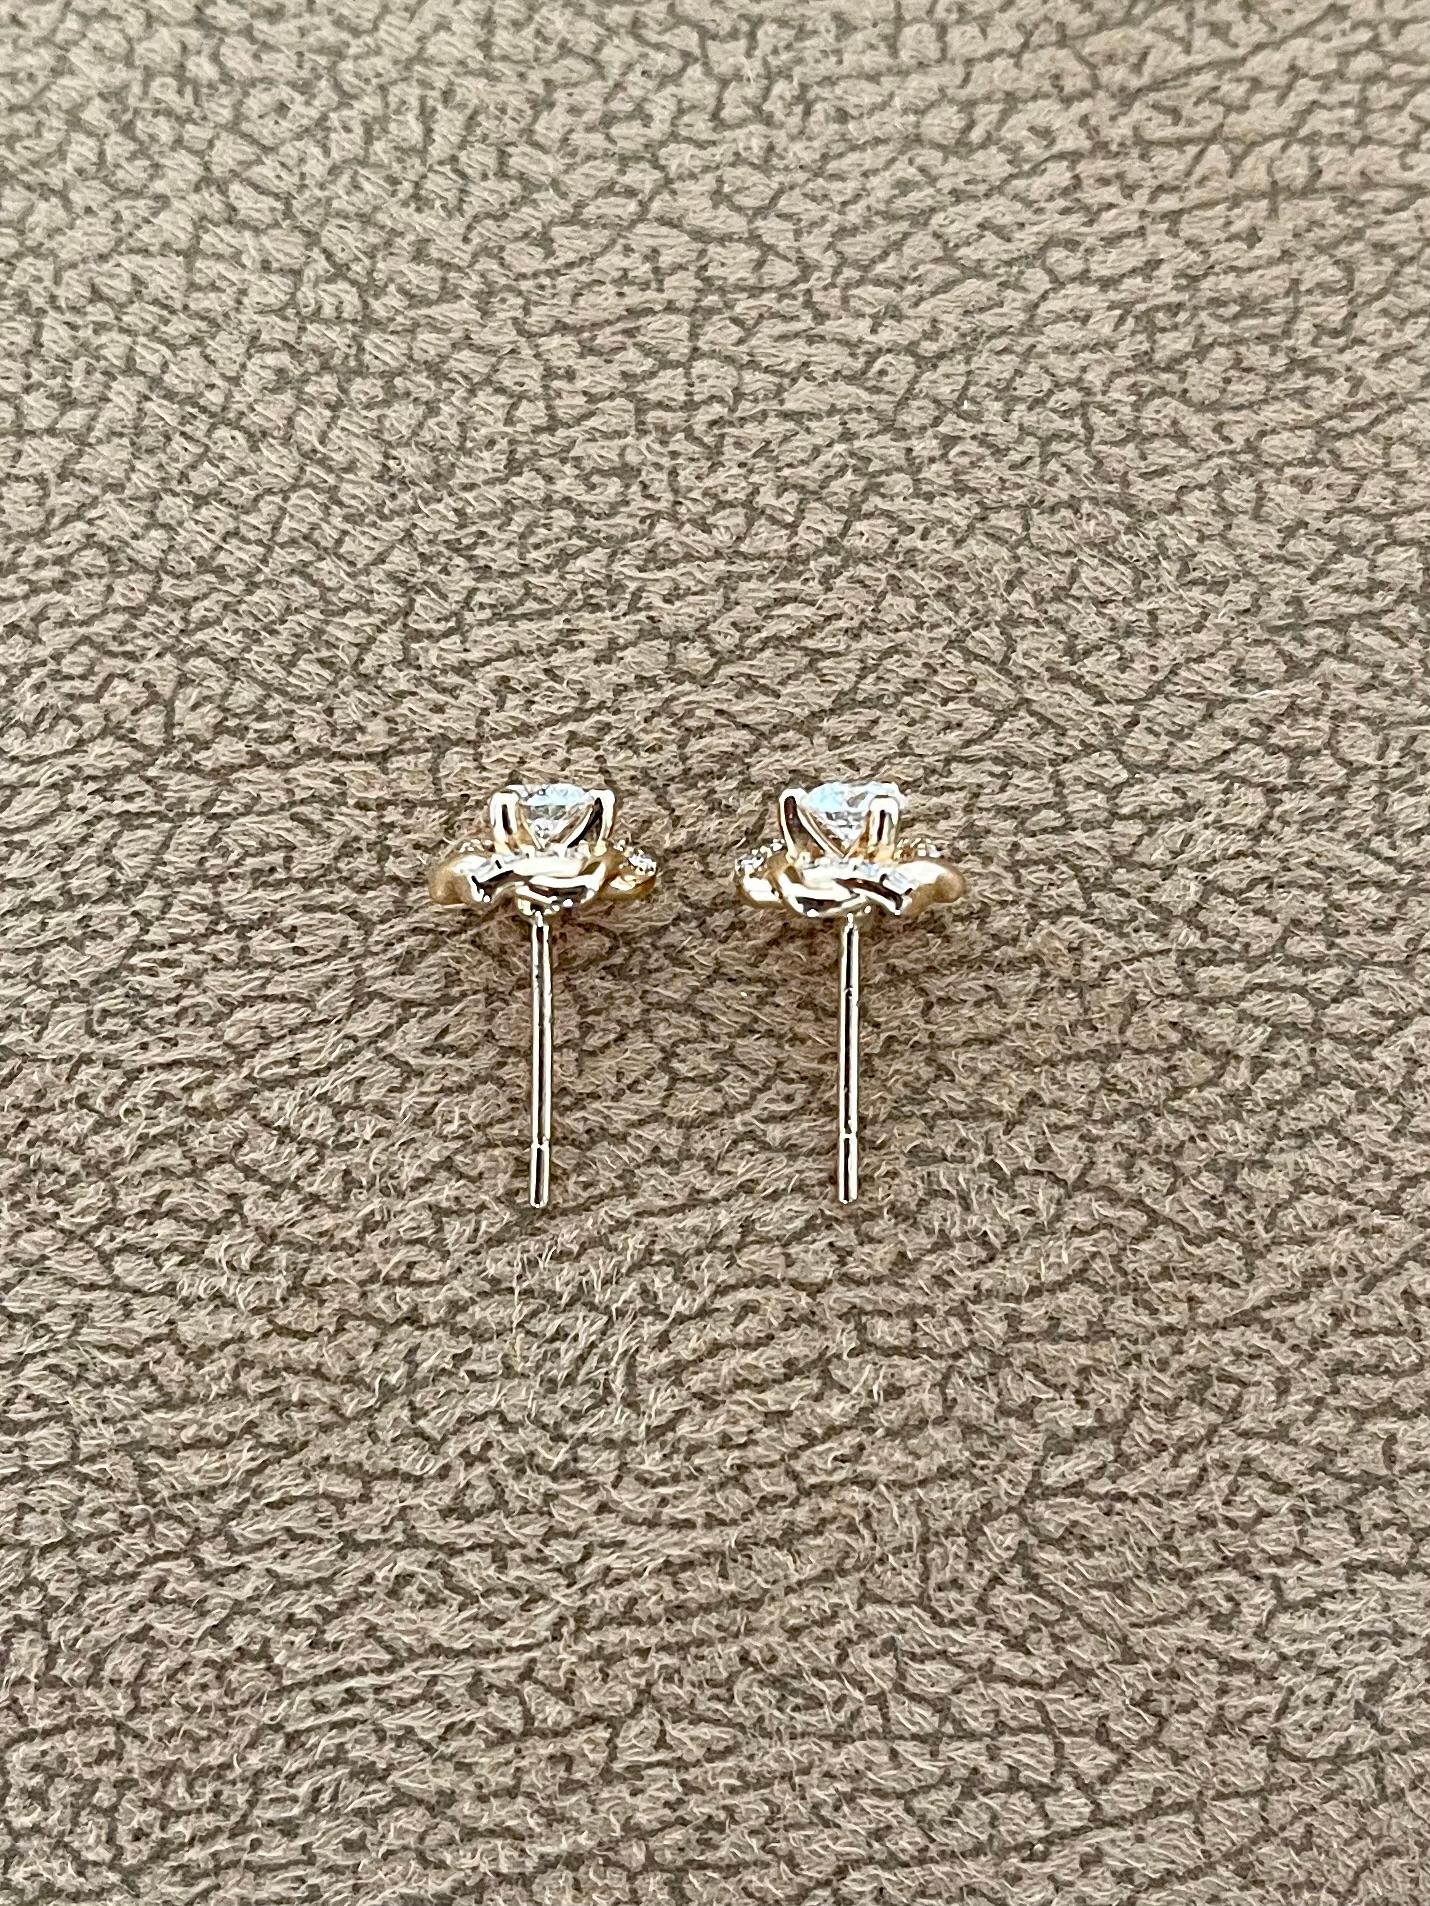 Women's Pair of E VVS2 Round Diamonds 0.62 Carats in 18K Rose Gold  GIA Certified For Sale